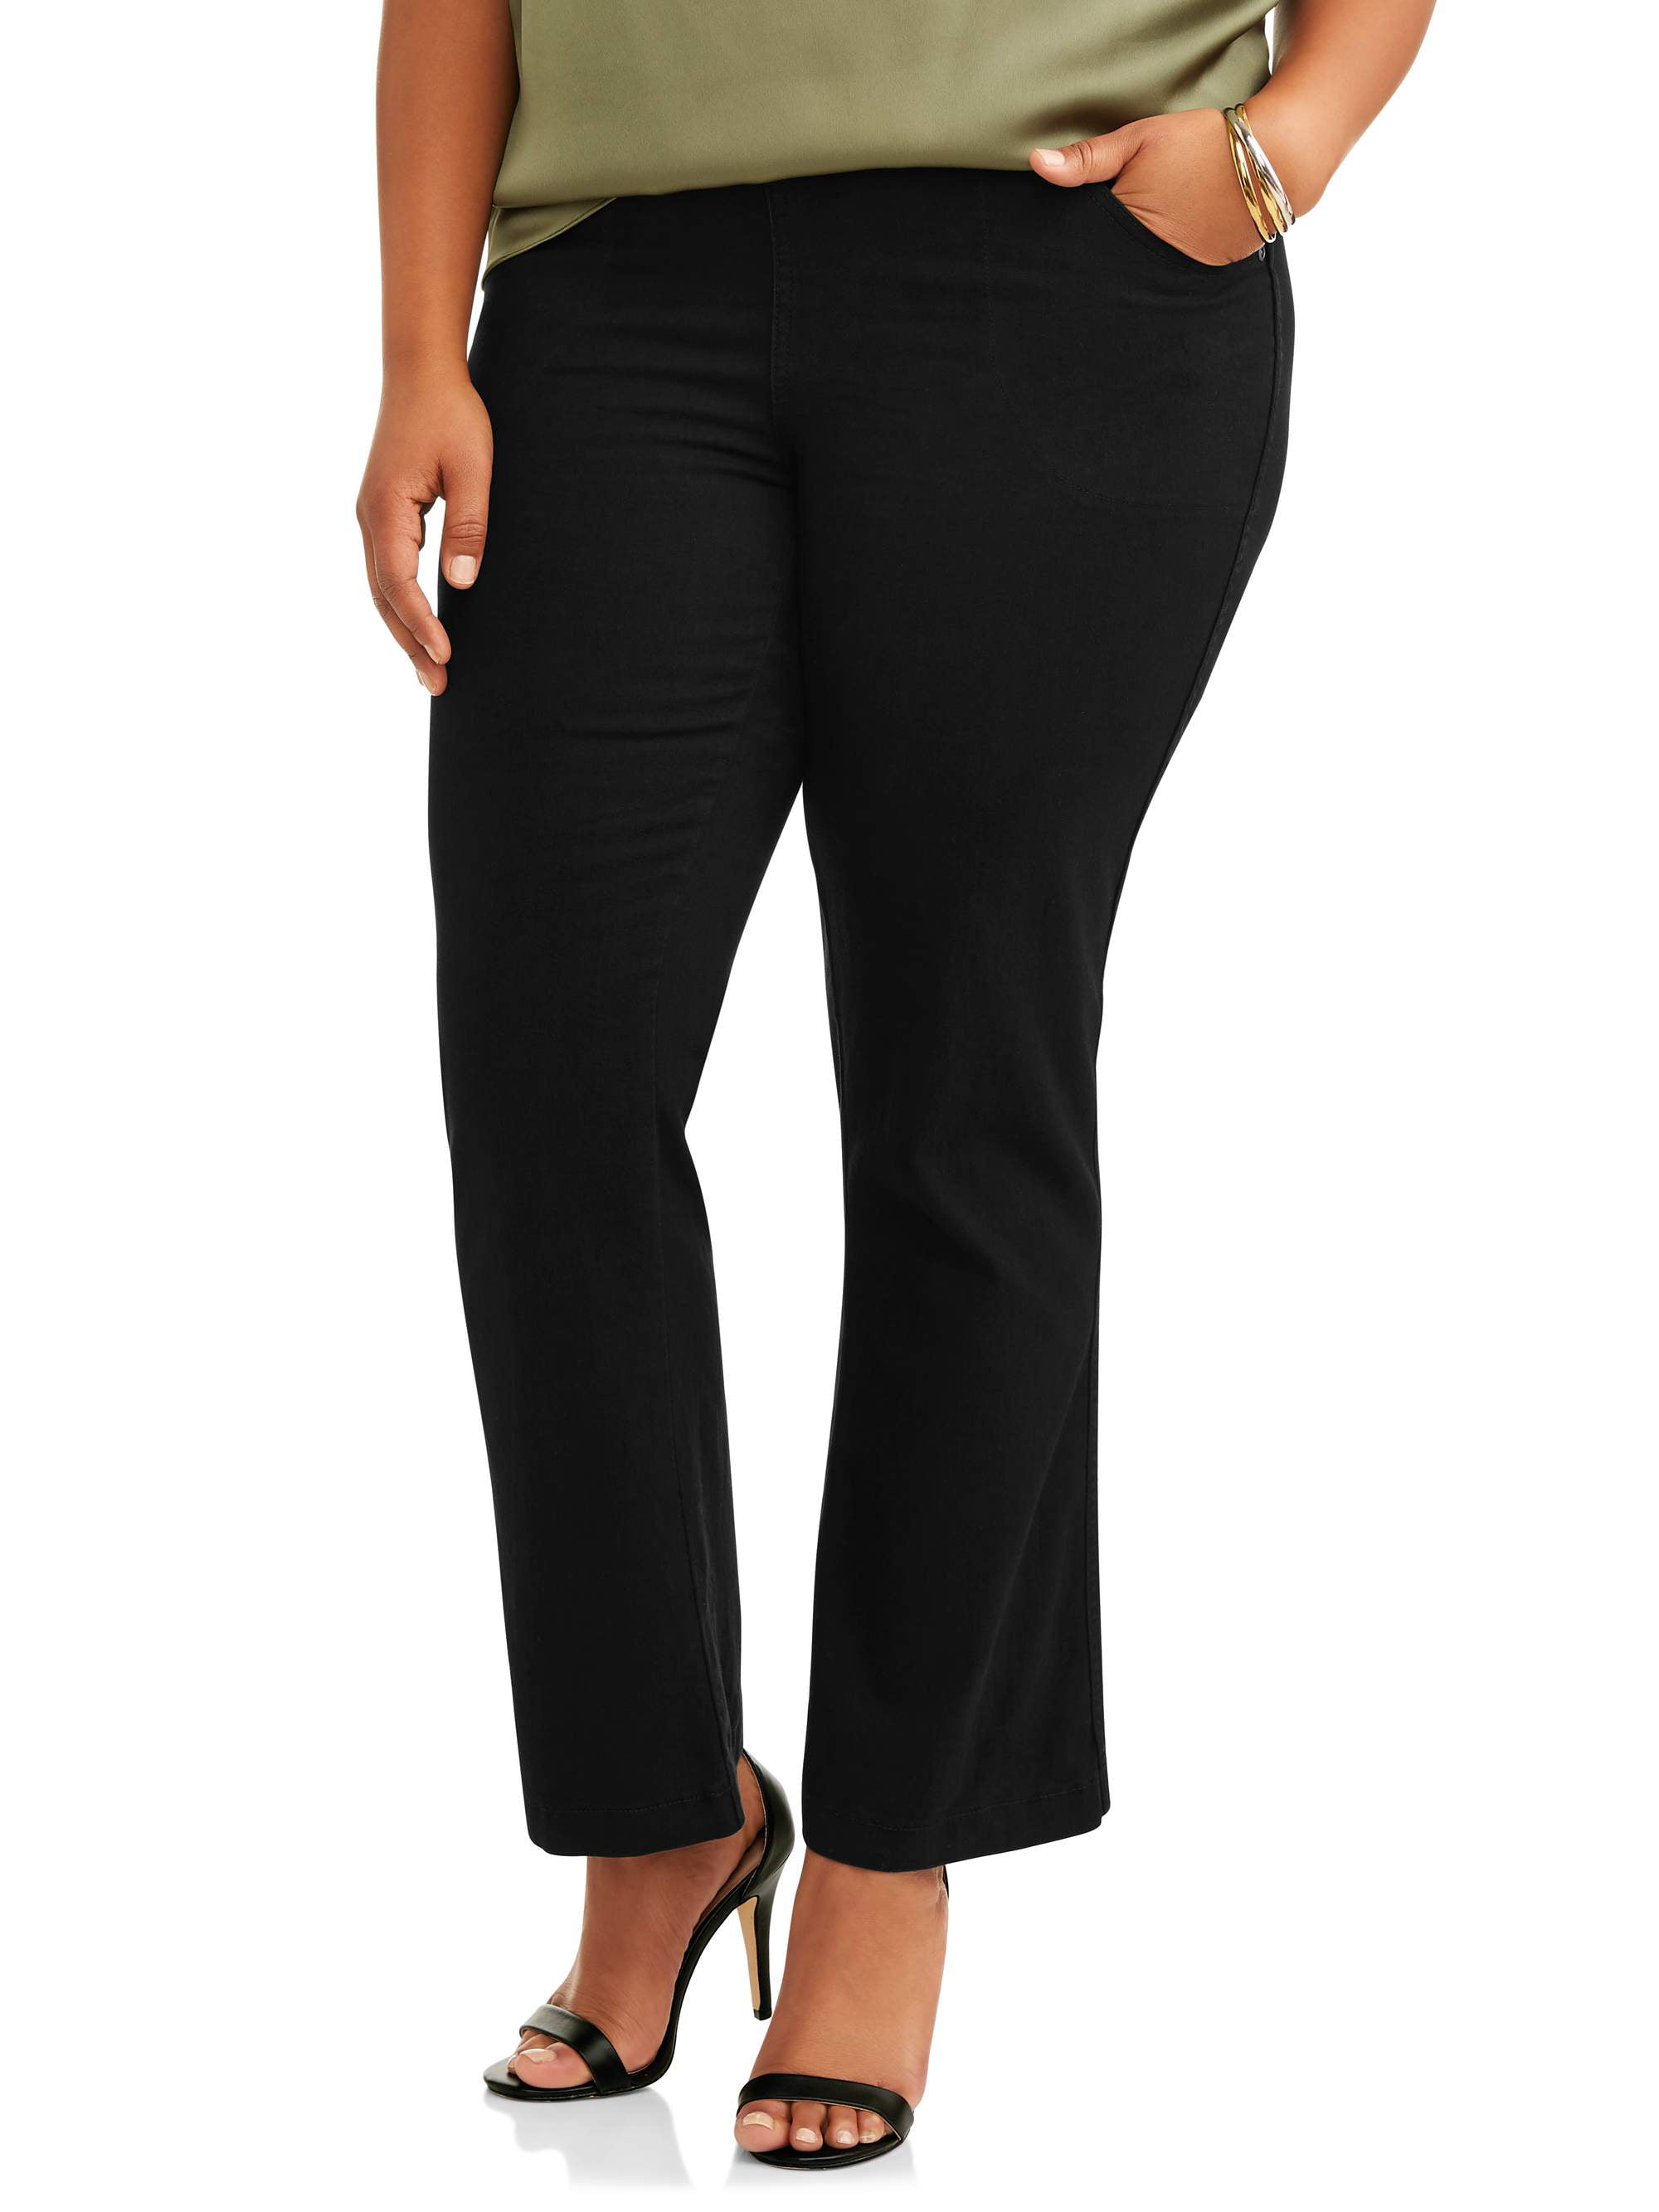 Just My Size - Just My Size Women's Plus Size 4 Pocket Stretch Bootcut ...